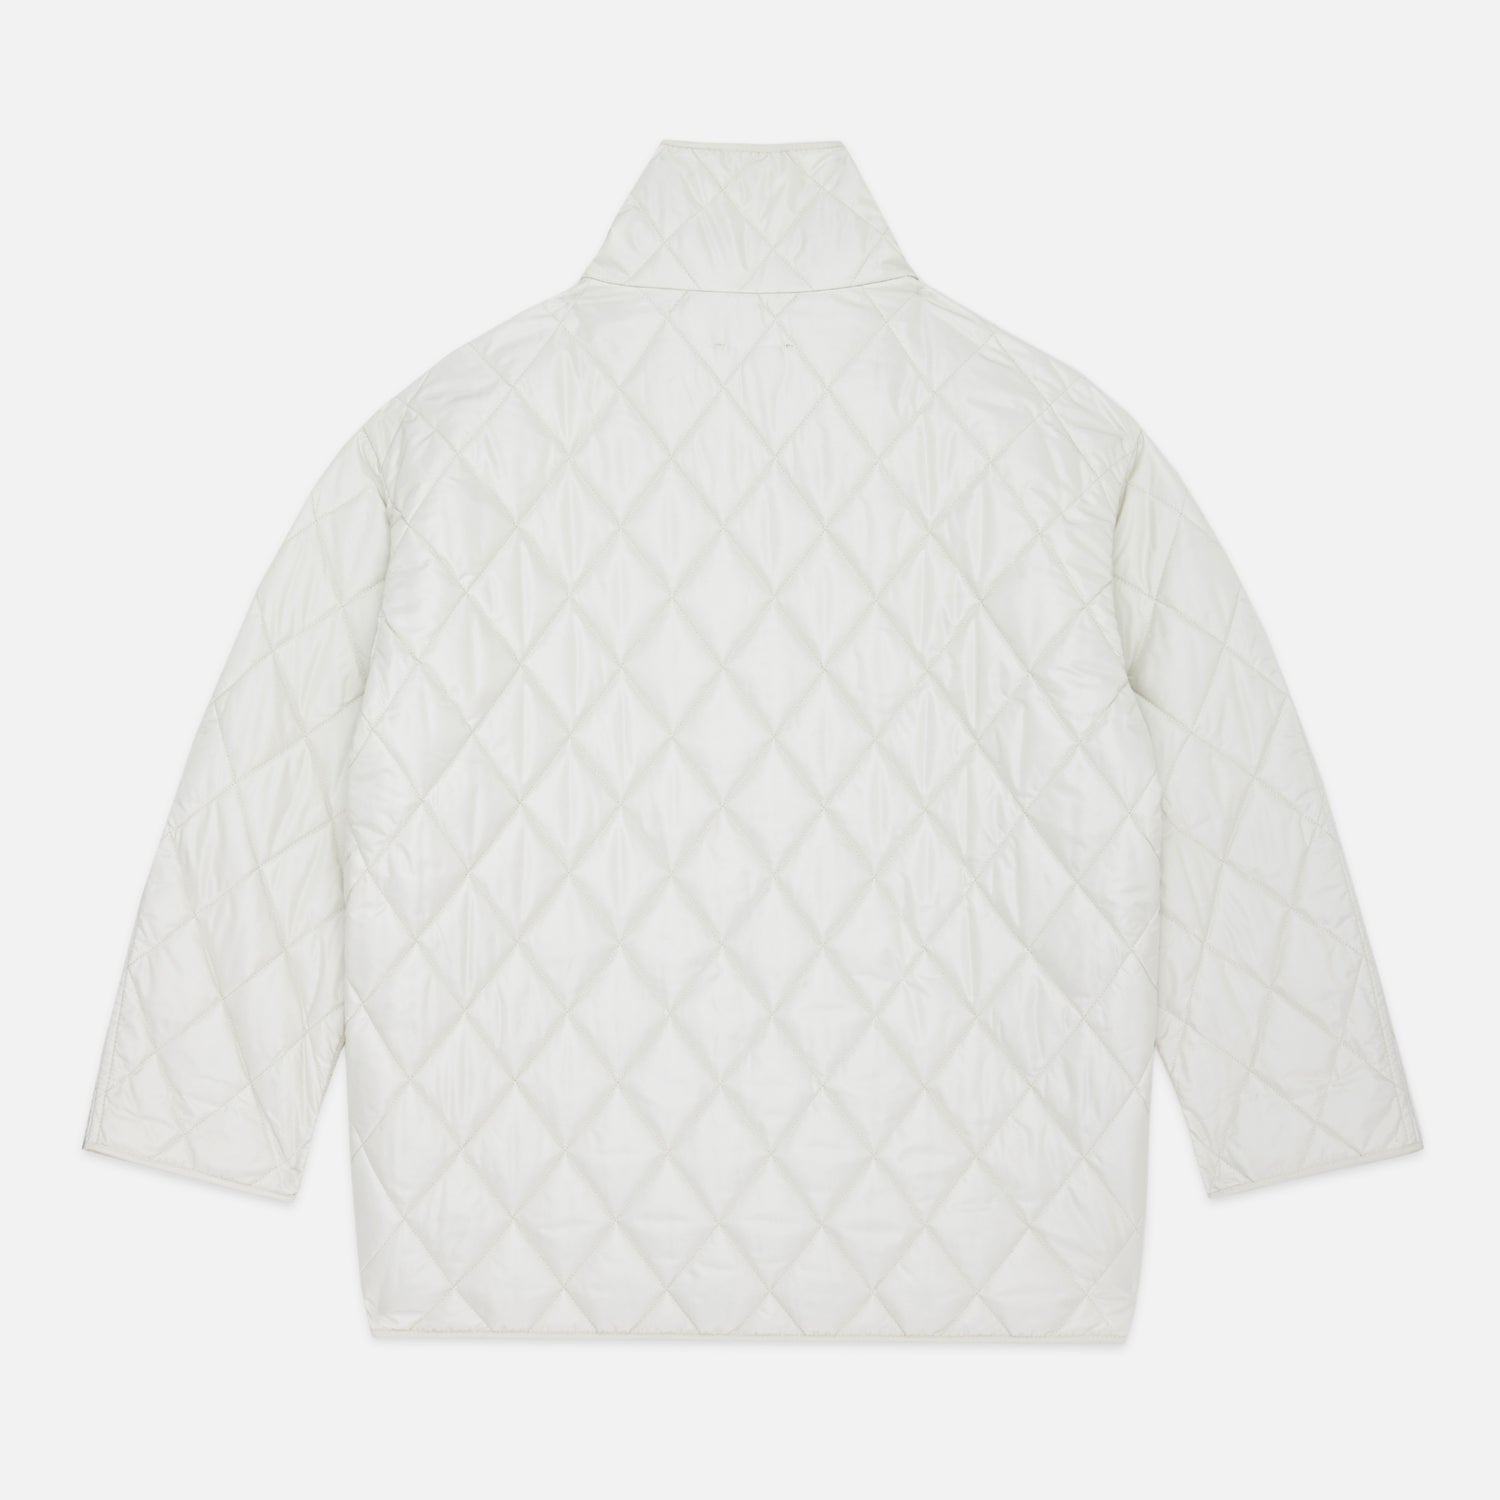 Louis Vuitton Long-sleeved Printed Cotton Shirt IVORY. Size M0